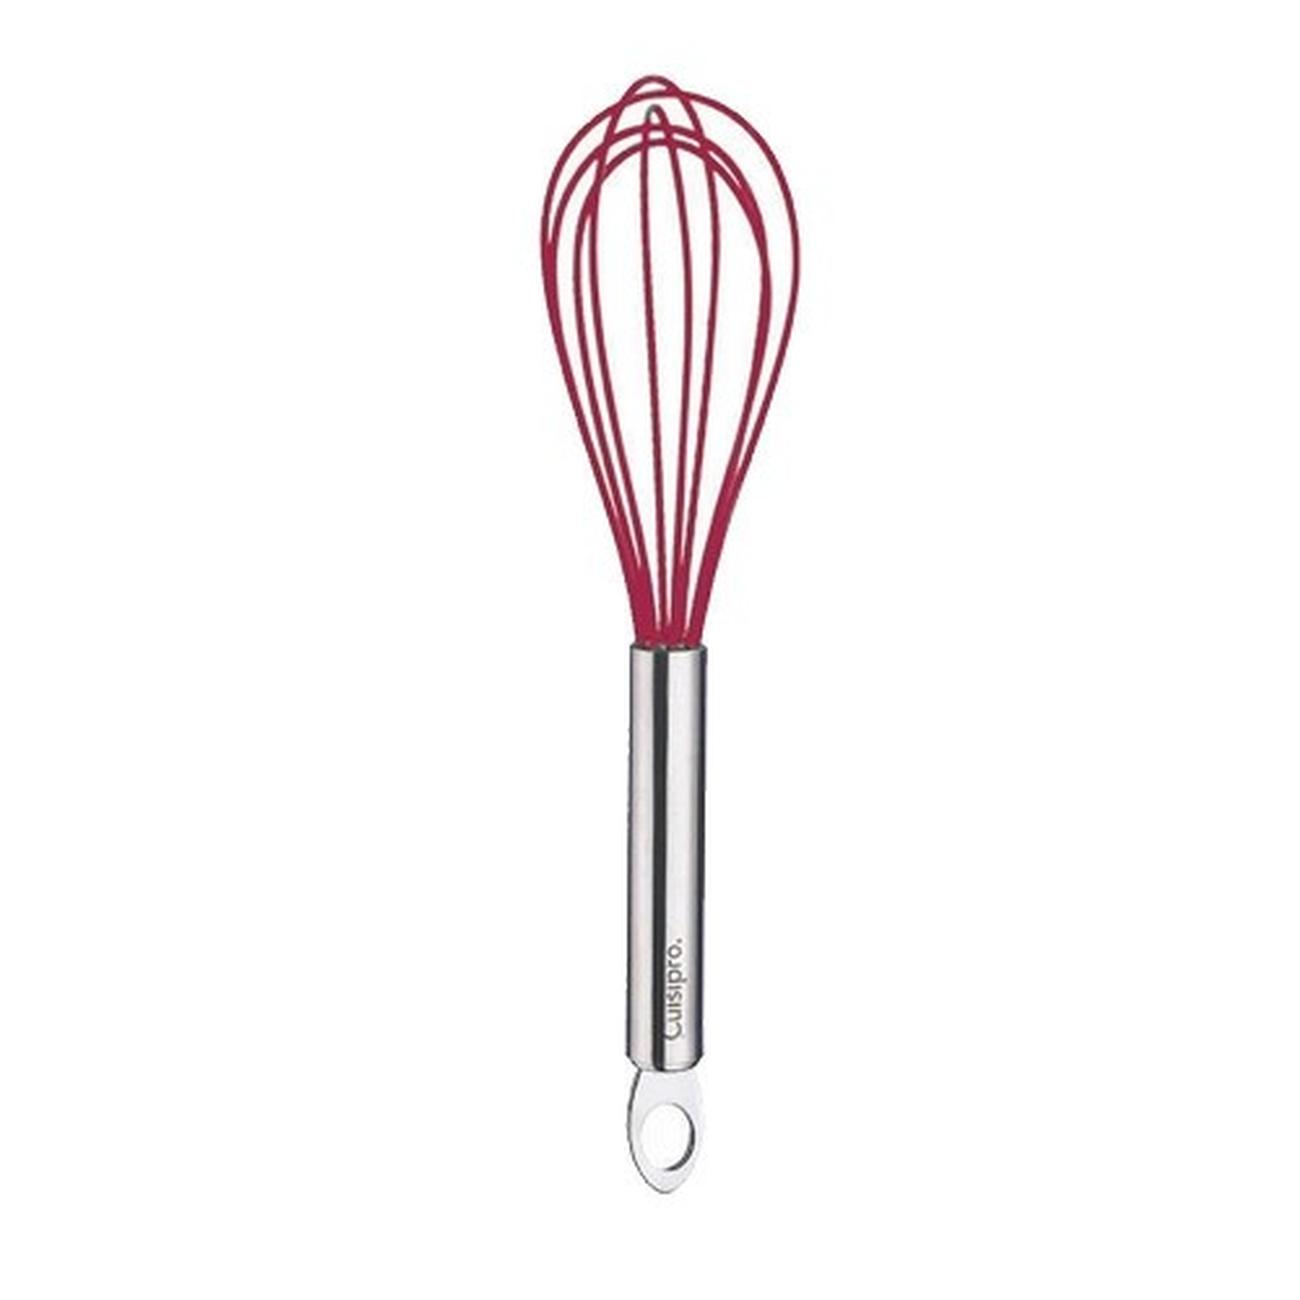 https://www.thekitchenwhisk.ie/contentfiles/productImages/Large/cuisipro-silicone-egg-whisk-20cm-red.jpg